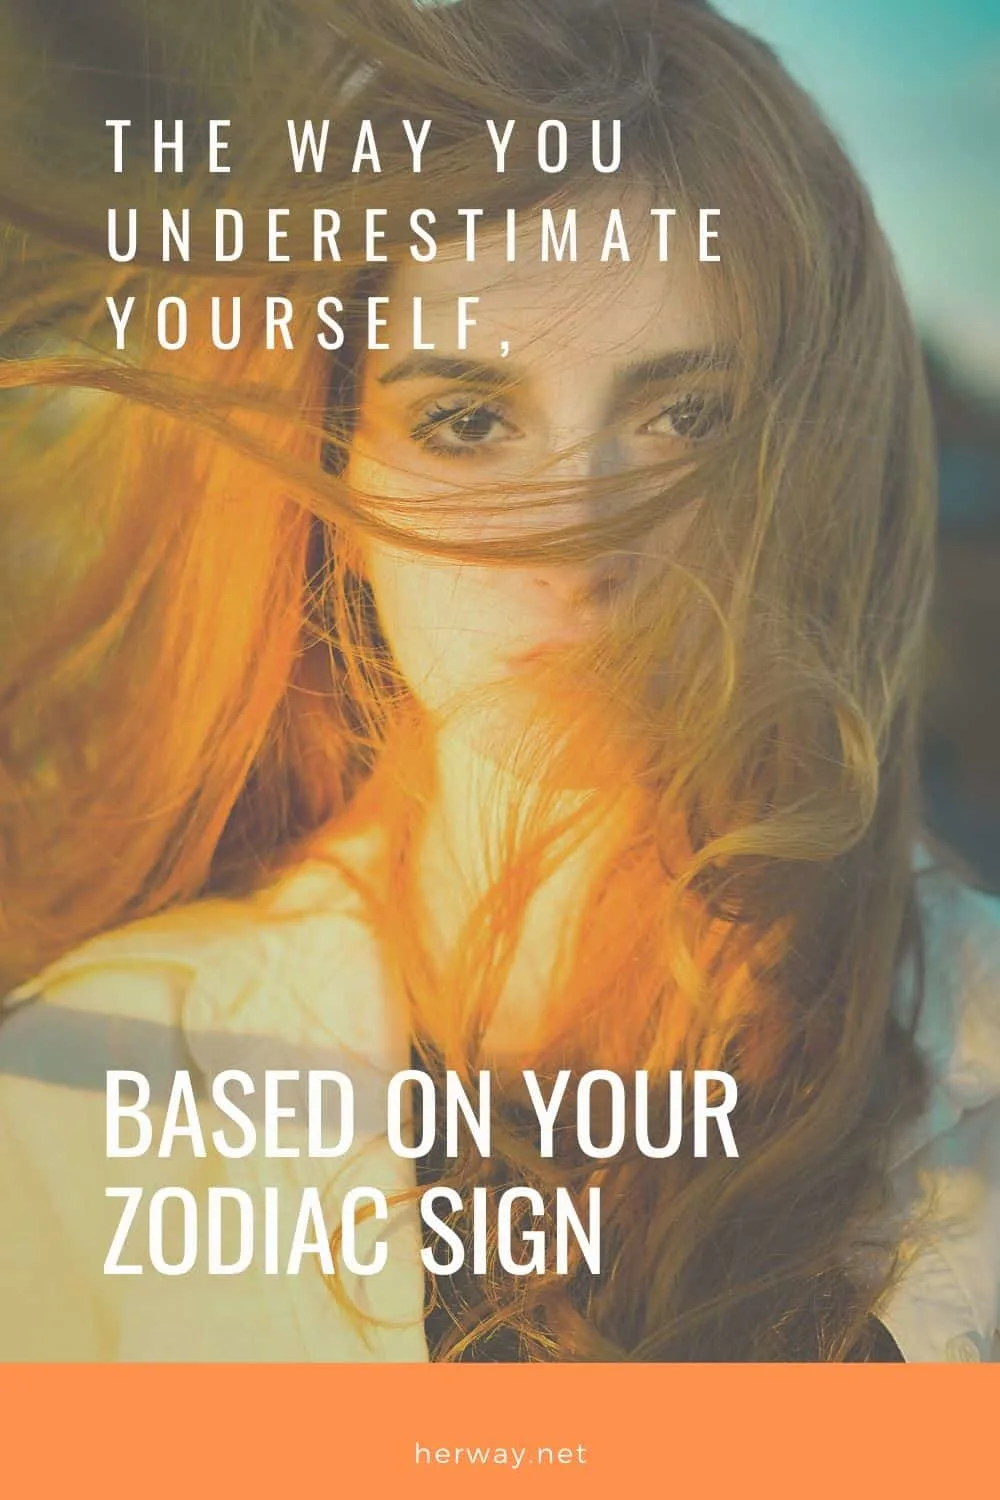 The Way You Underestimate Yourself, Based On Your Zodiac Sign